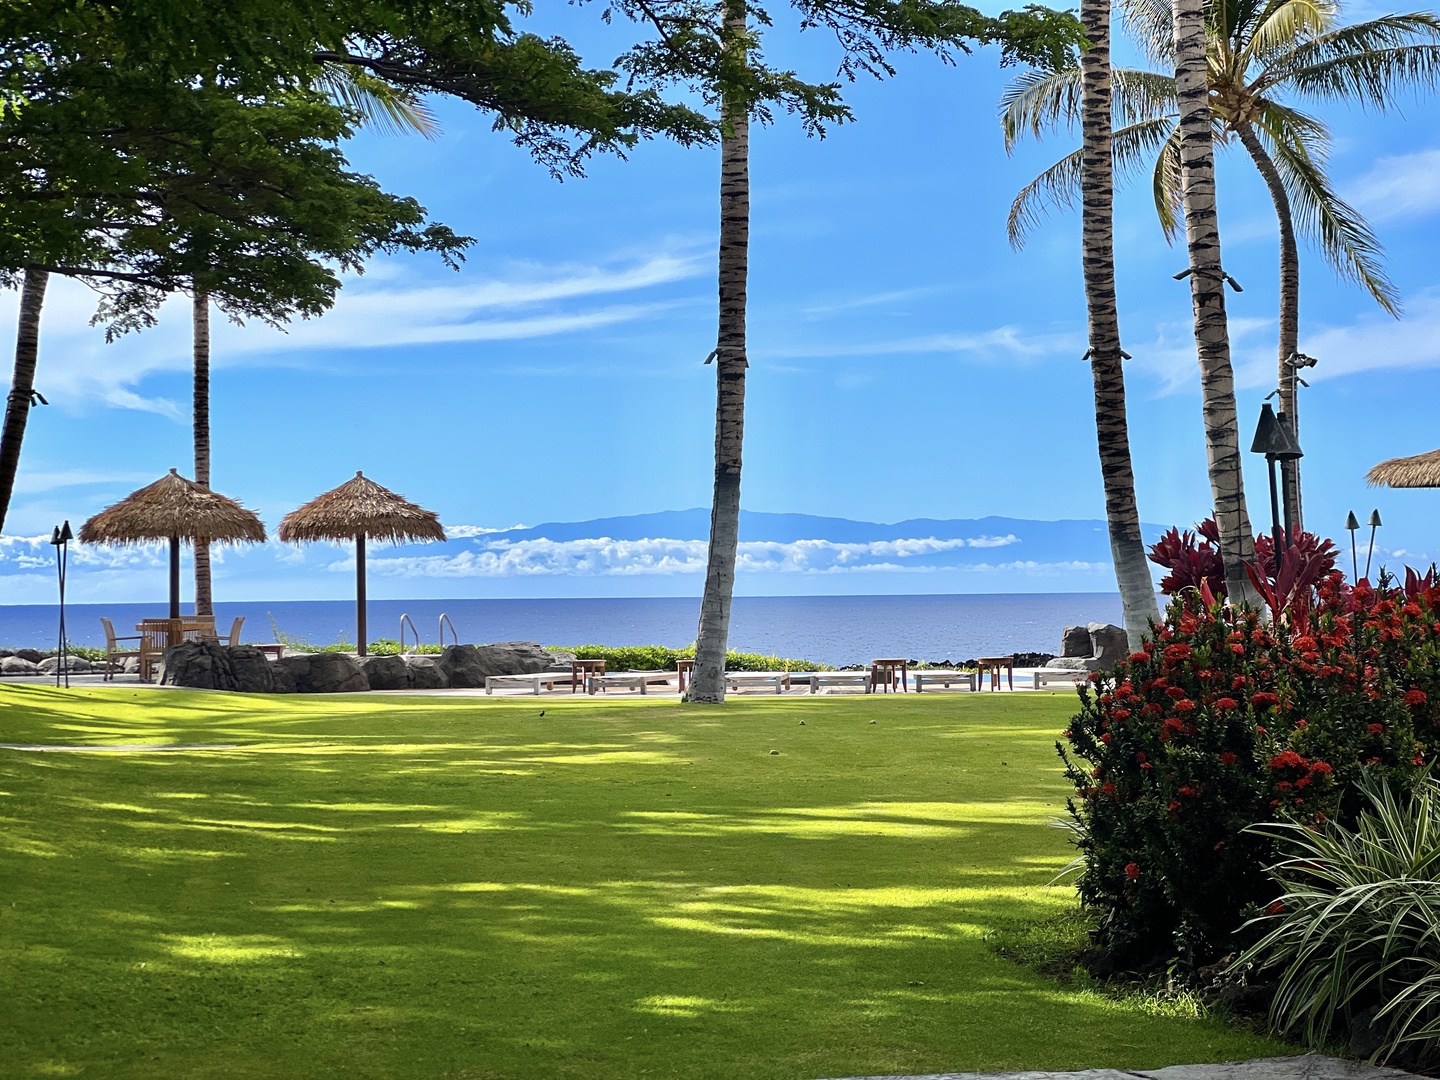 Kamuela Vacation Rentals, 3BD OneOcean (1C) at Mauna Lani Resort - Wide View of "The Ocean Club" Amenity Center